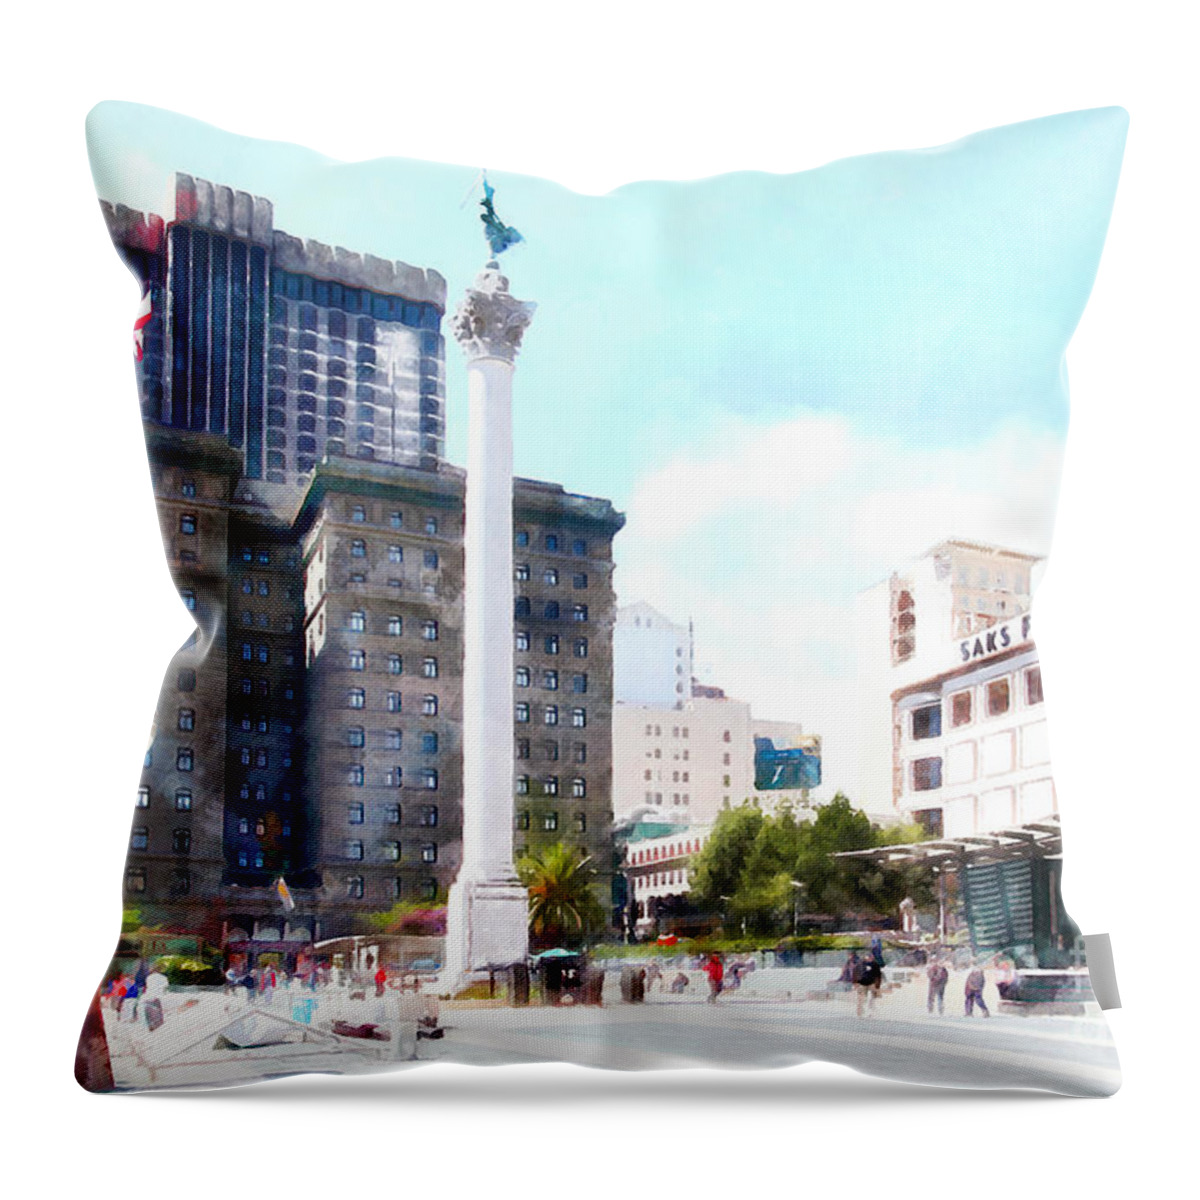 Francisco Throw Pillow featuring the photograph San Francisco Union Square 5D17933wcstyle by Wingsdomain Art and Photography